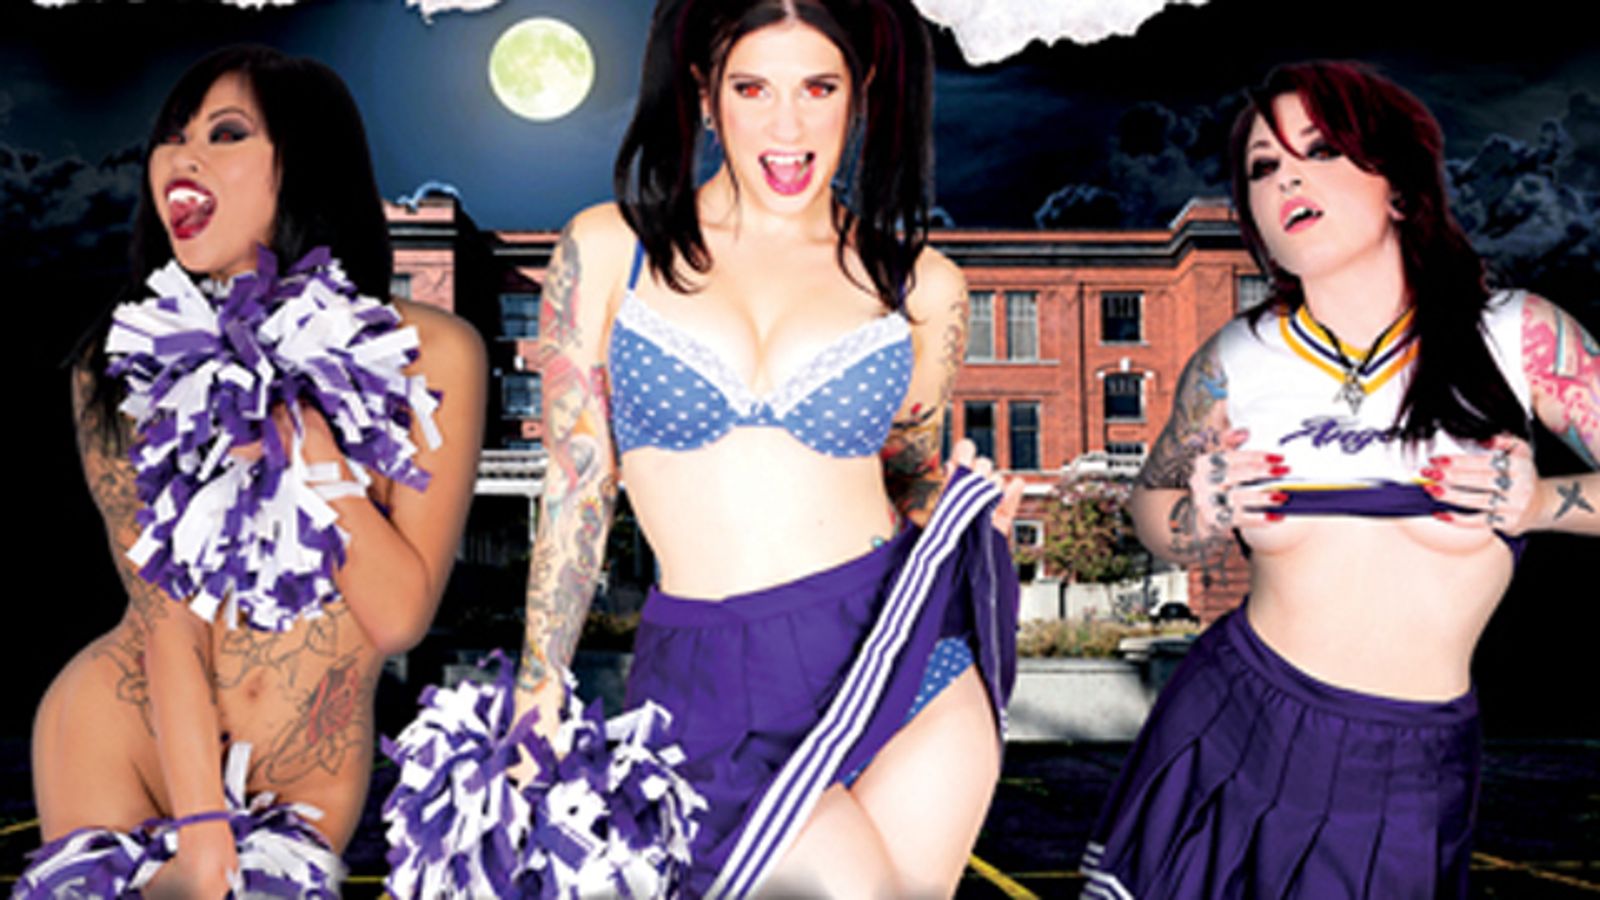 ‘Vampire Cheerleaders’ from Burning Angel Available on DVD